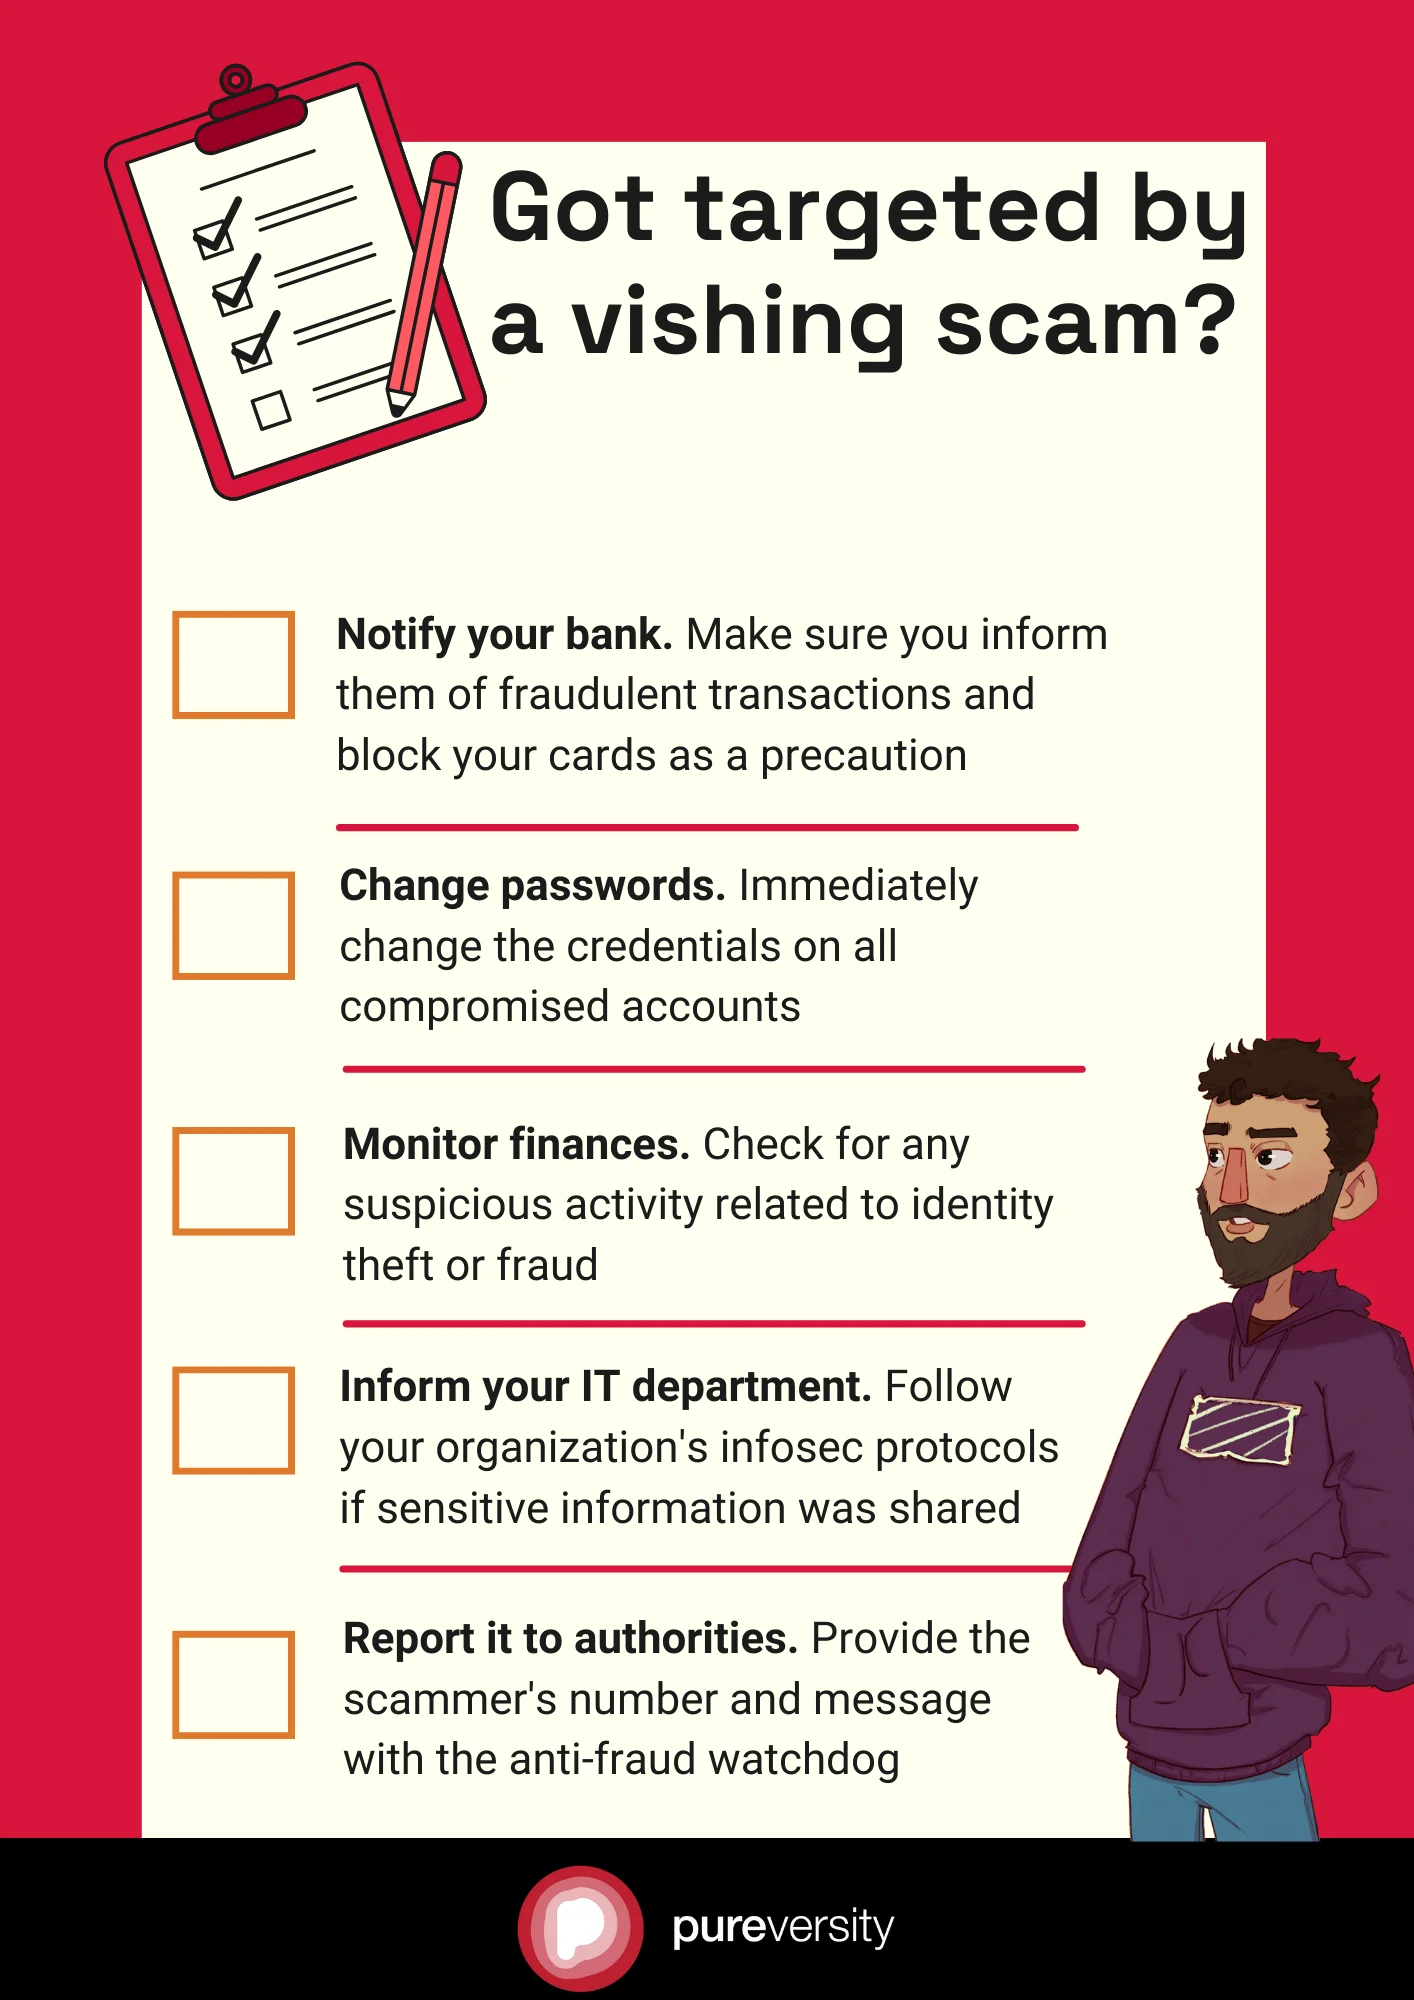 Fallen victim to a vishing scam? This checklist mentions the steps you should take to protect yourself from voice phishing.